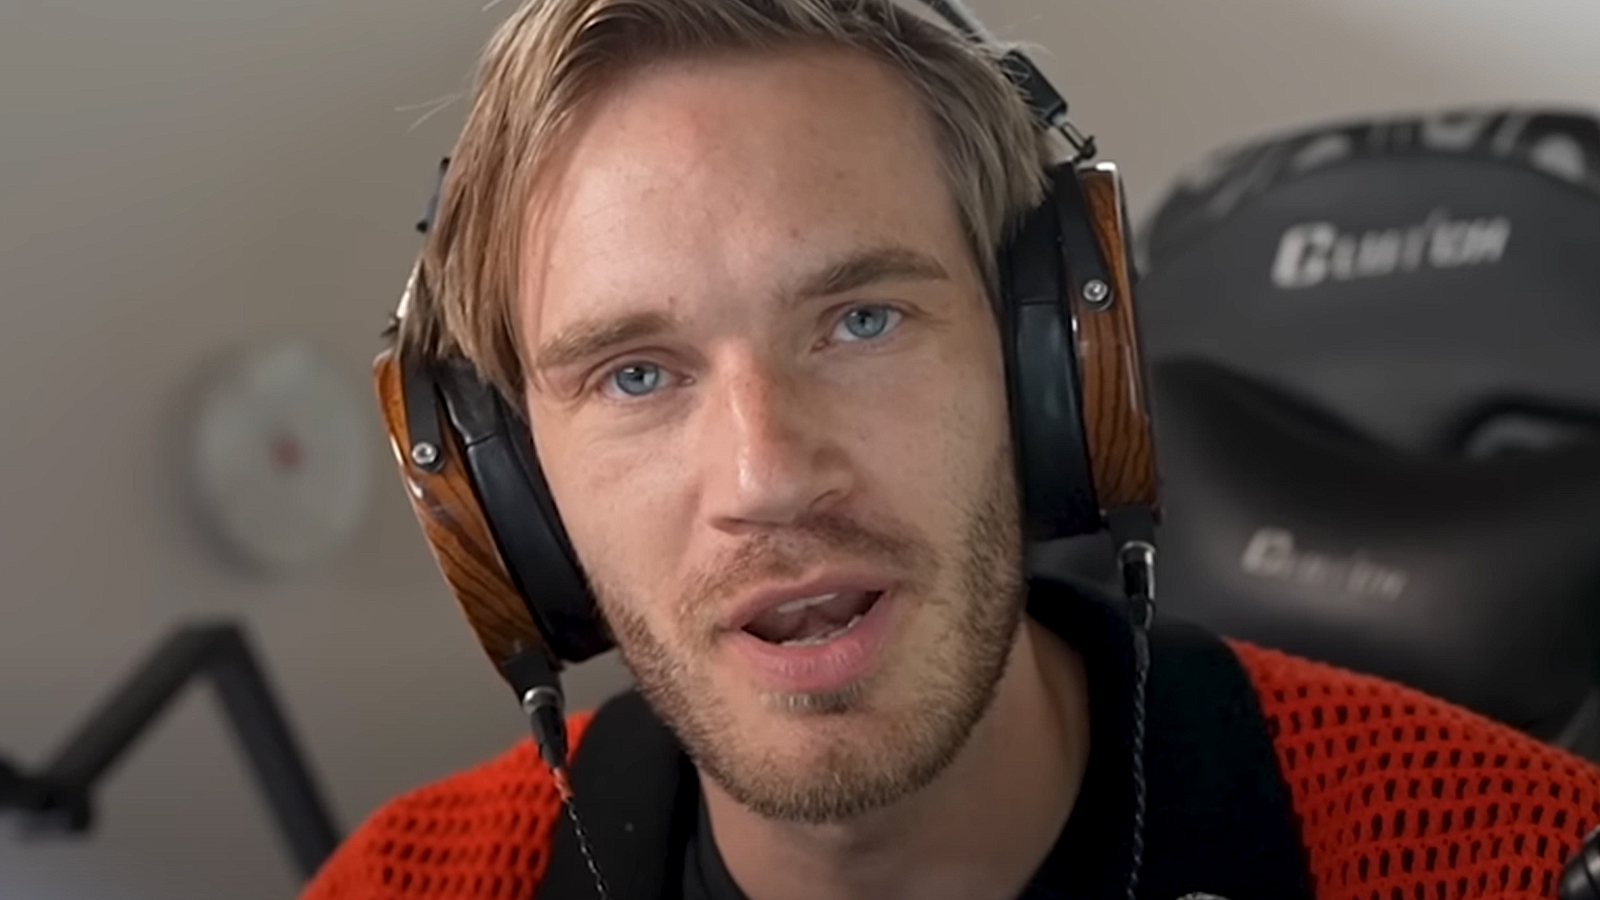 PewDiePie latest to call out 